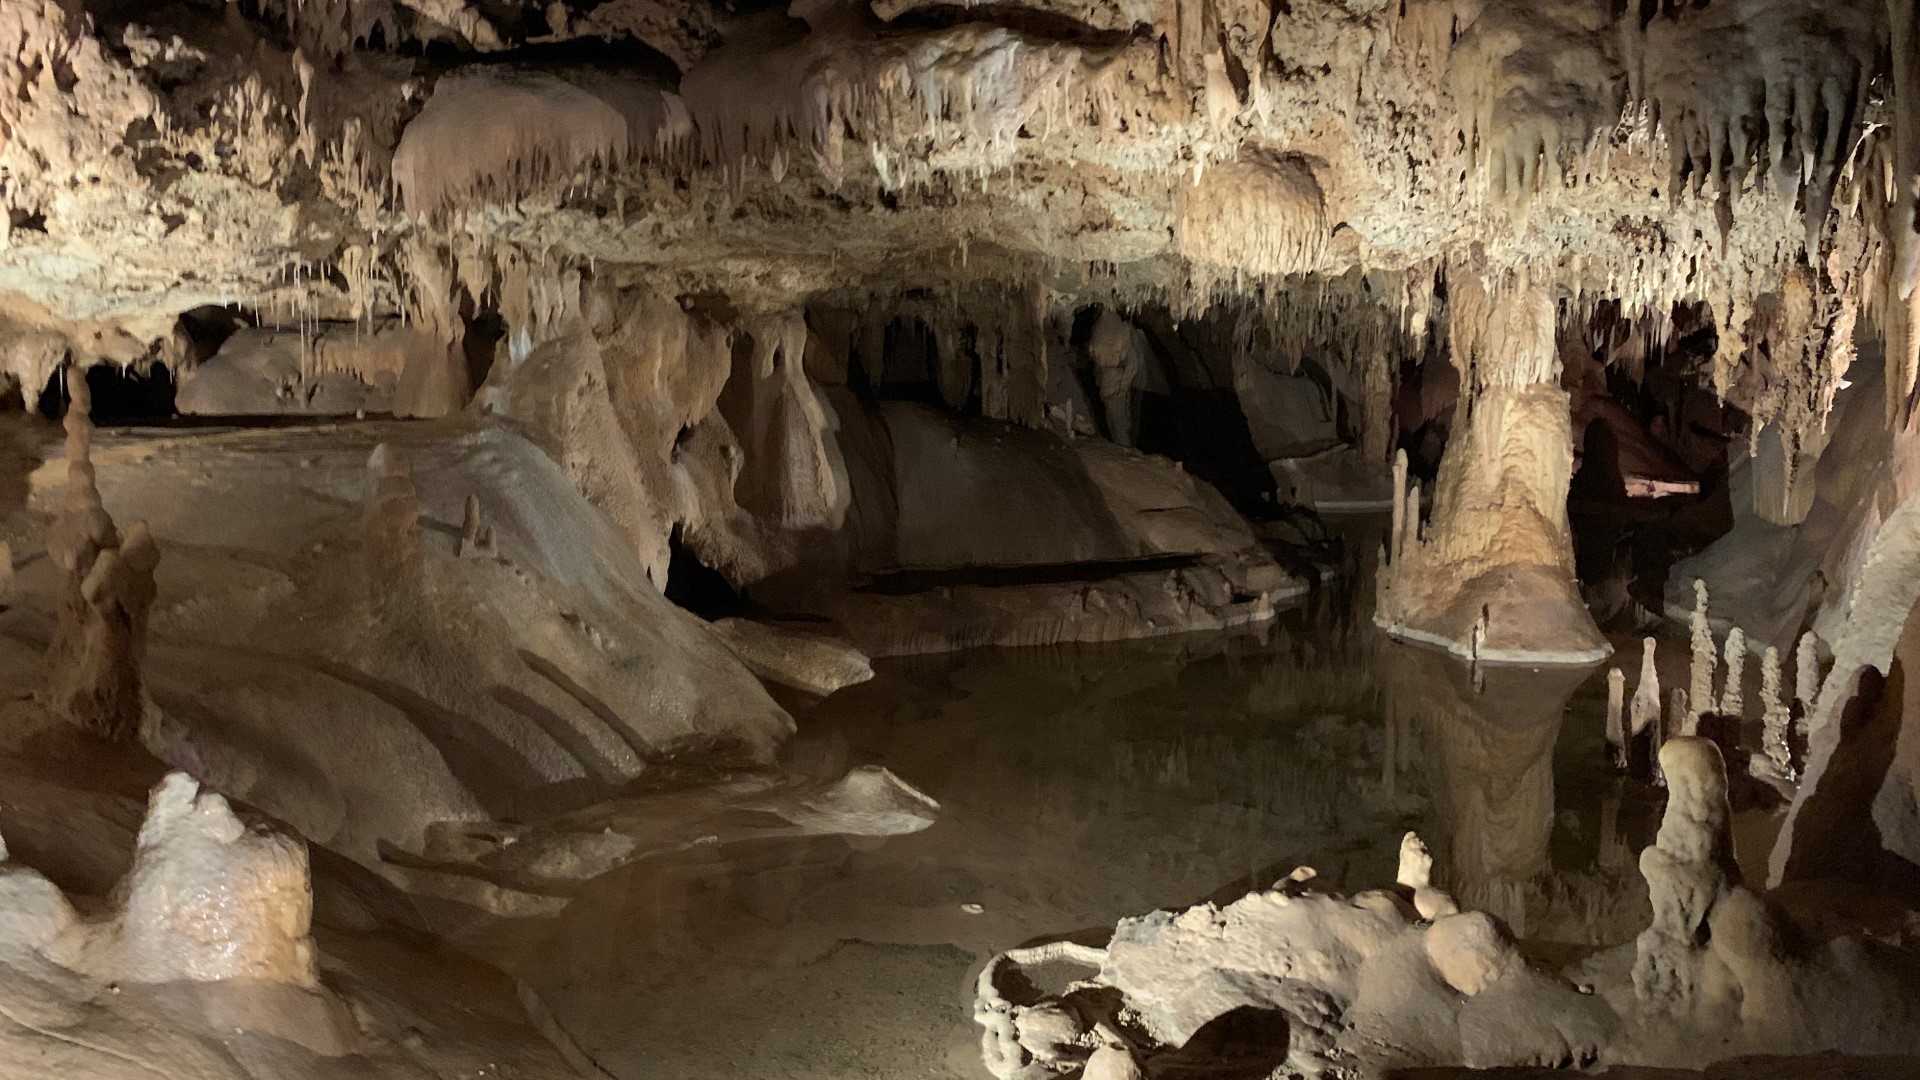 Meagan Massey explored the Inner Space Cavern, located in Georgetown, Texas, to learn the history of the cave and how it can be used as a getaway from the cold weather.